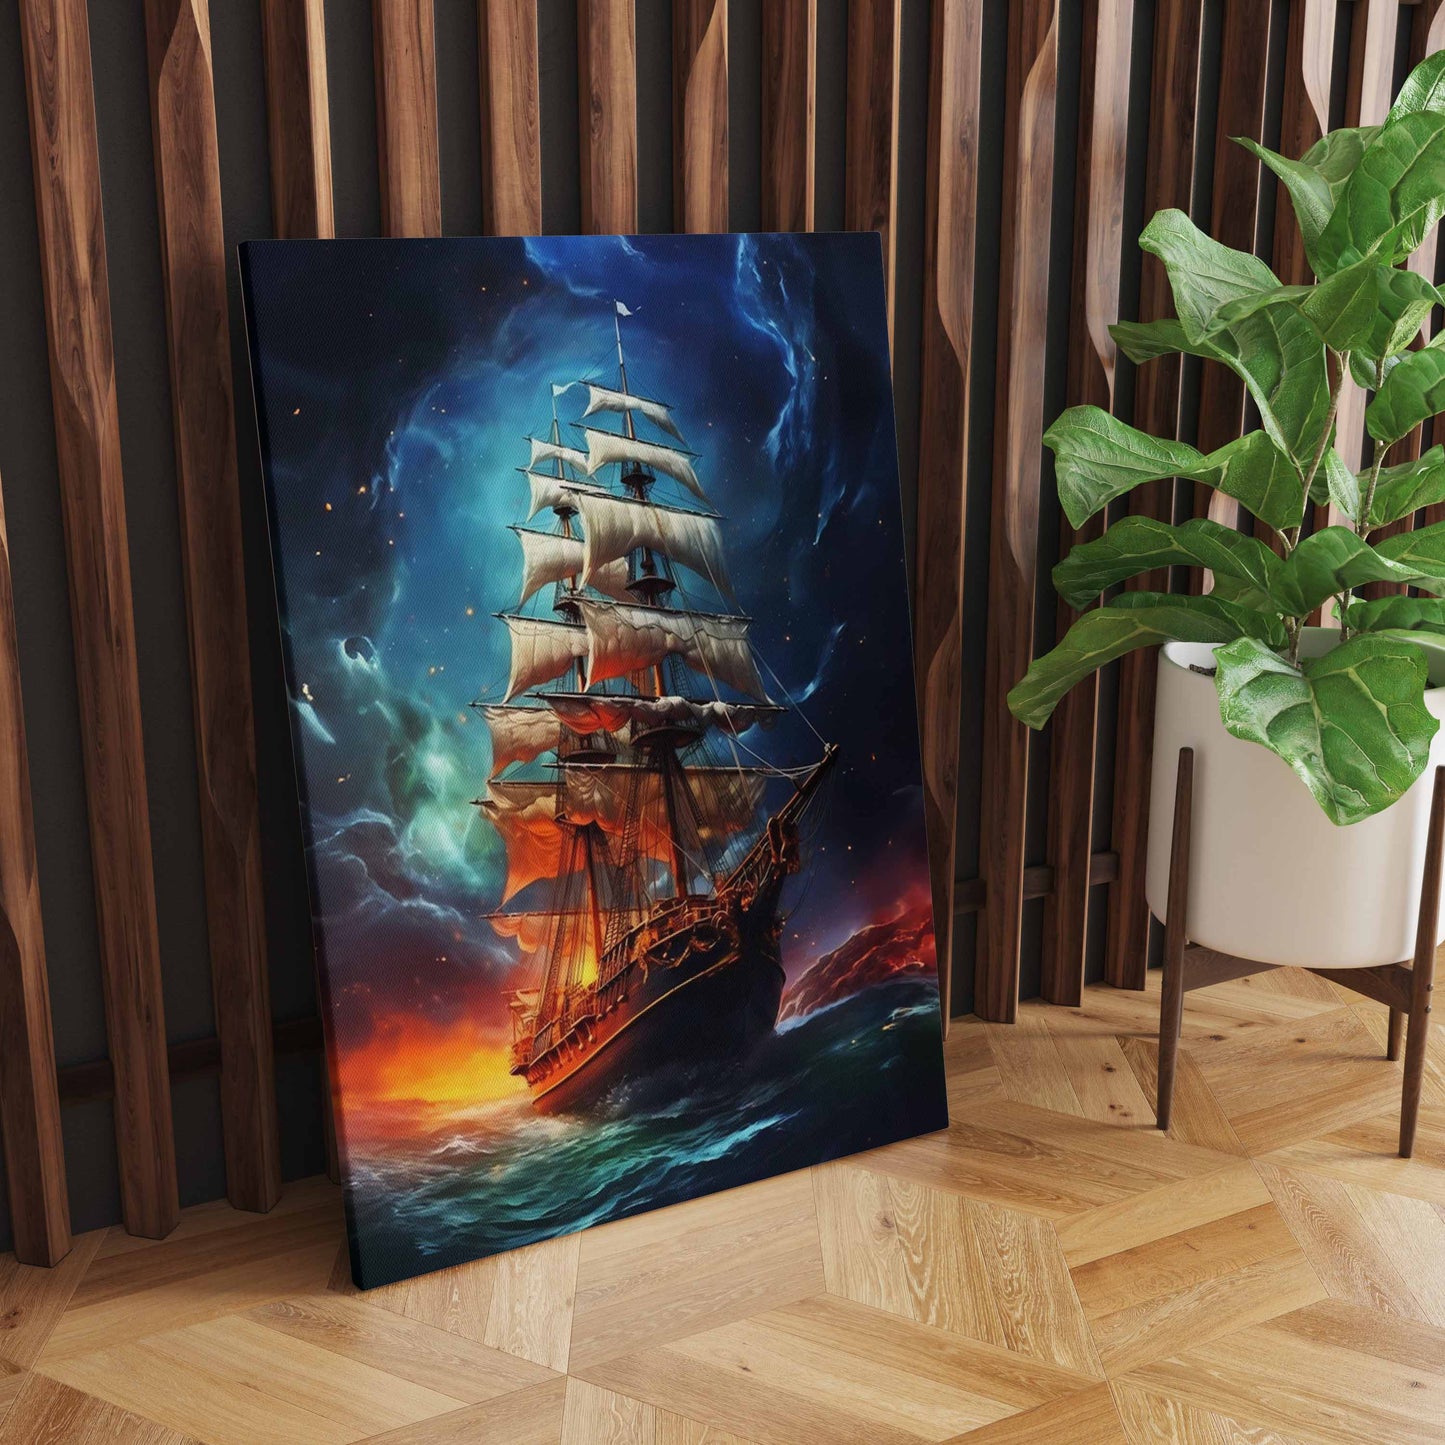 Journey to Resilience: A Wall Art Depicting an AI Sailing Ship Sailing Away from the Flames - Embrace Hope Amidst Adversity - S05E80